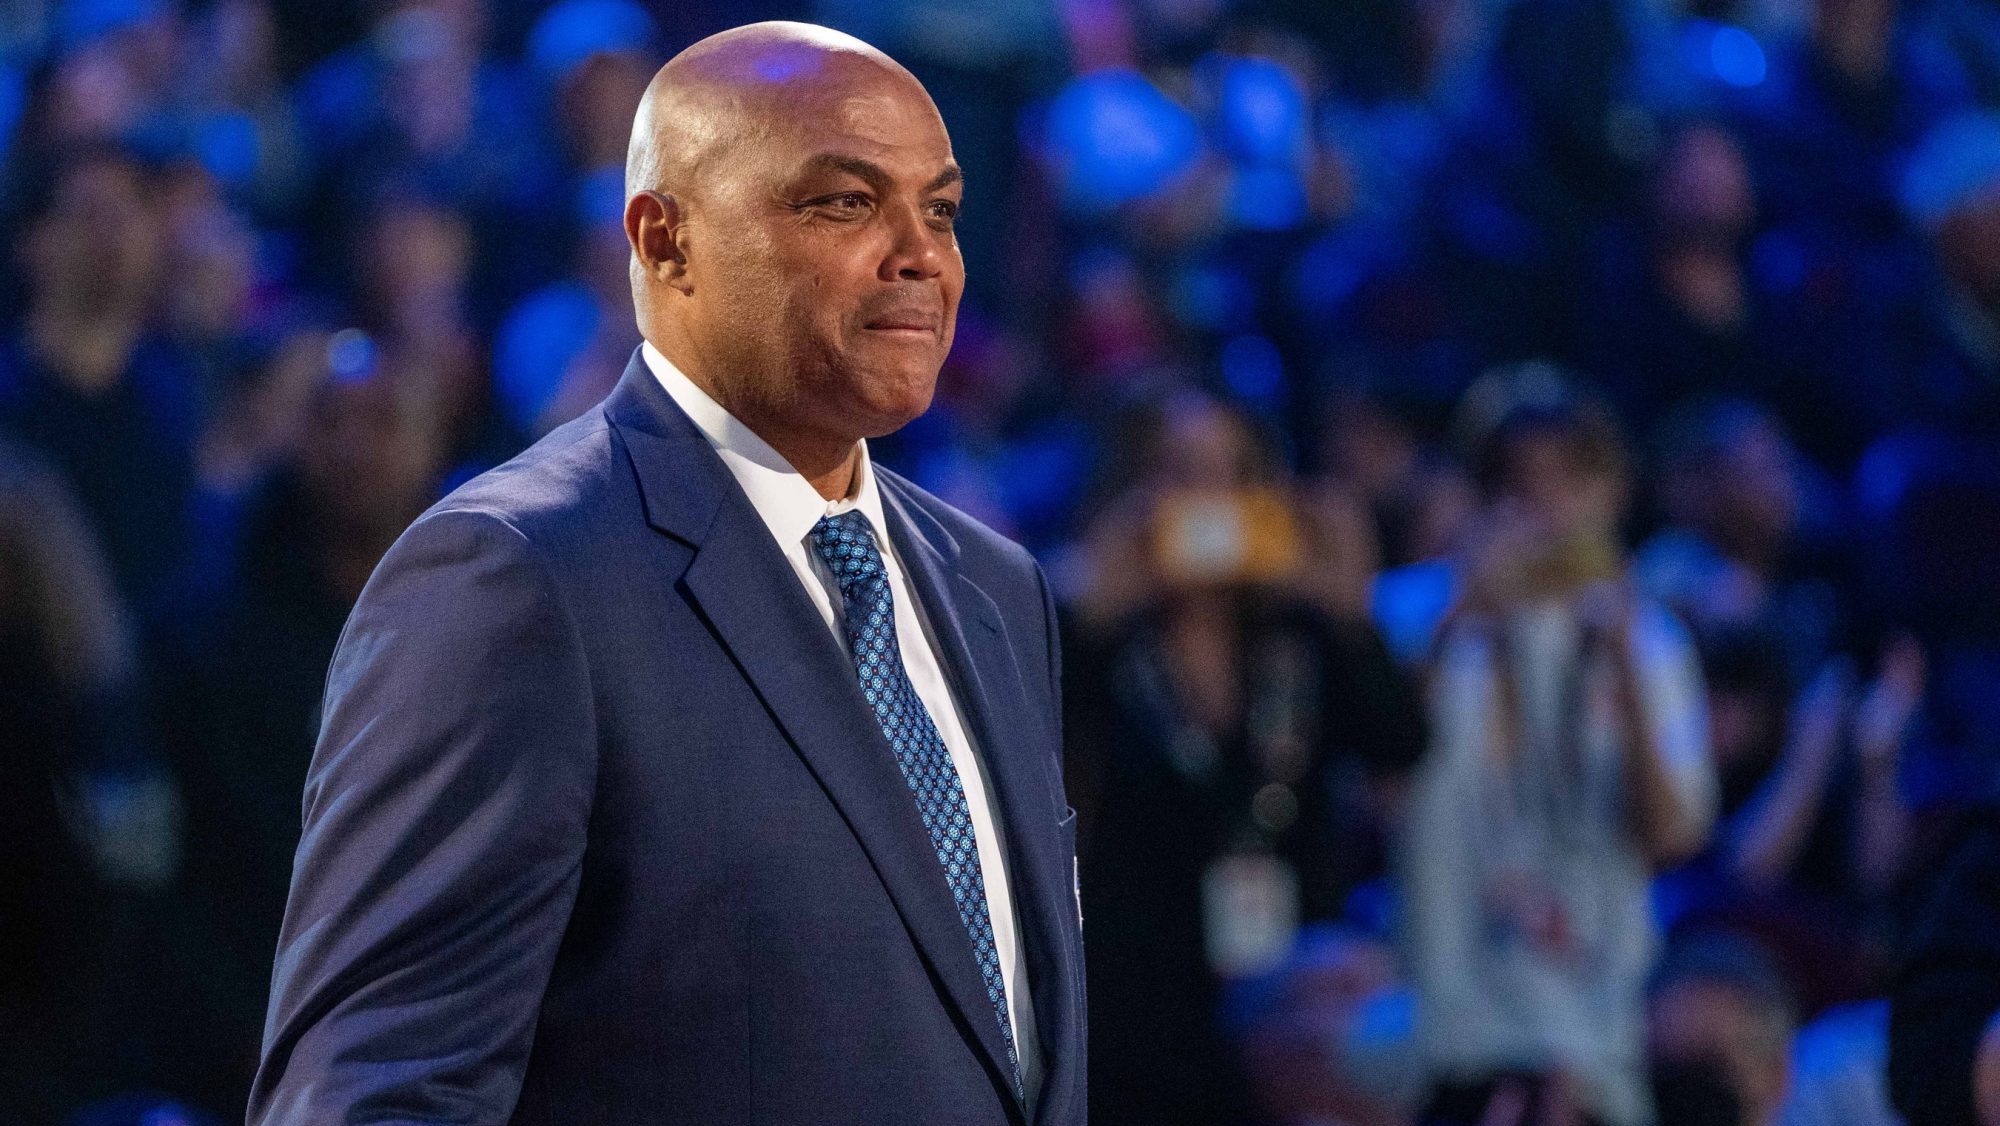 The Line to Hire Charles Barkley Is Already Getting Long